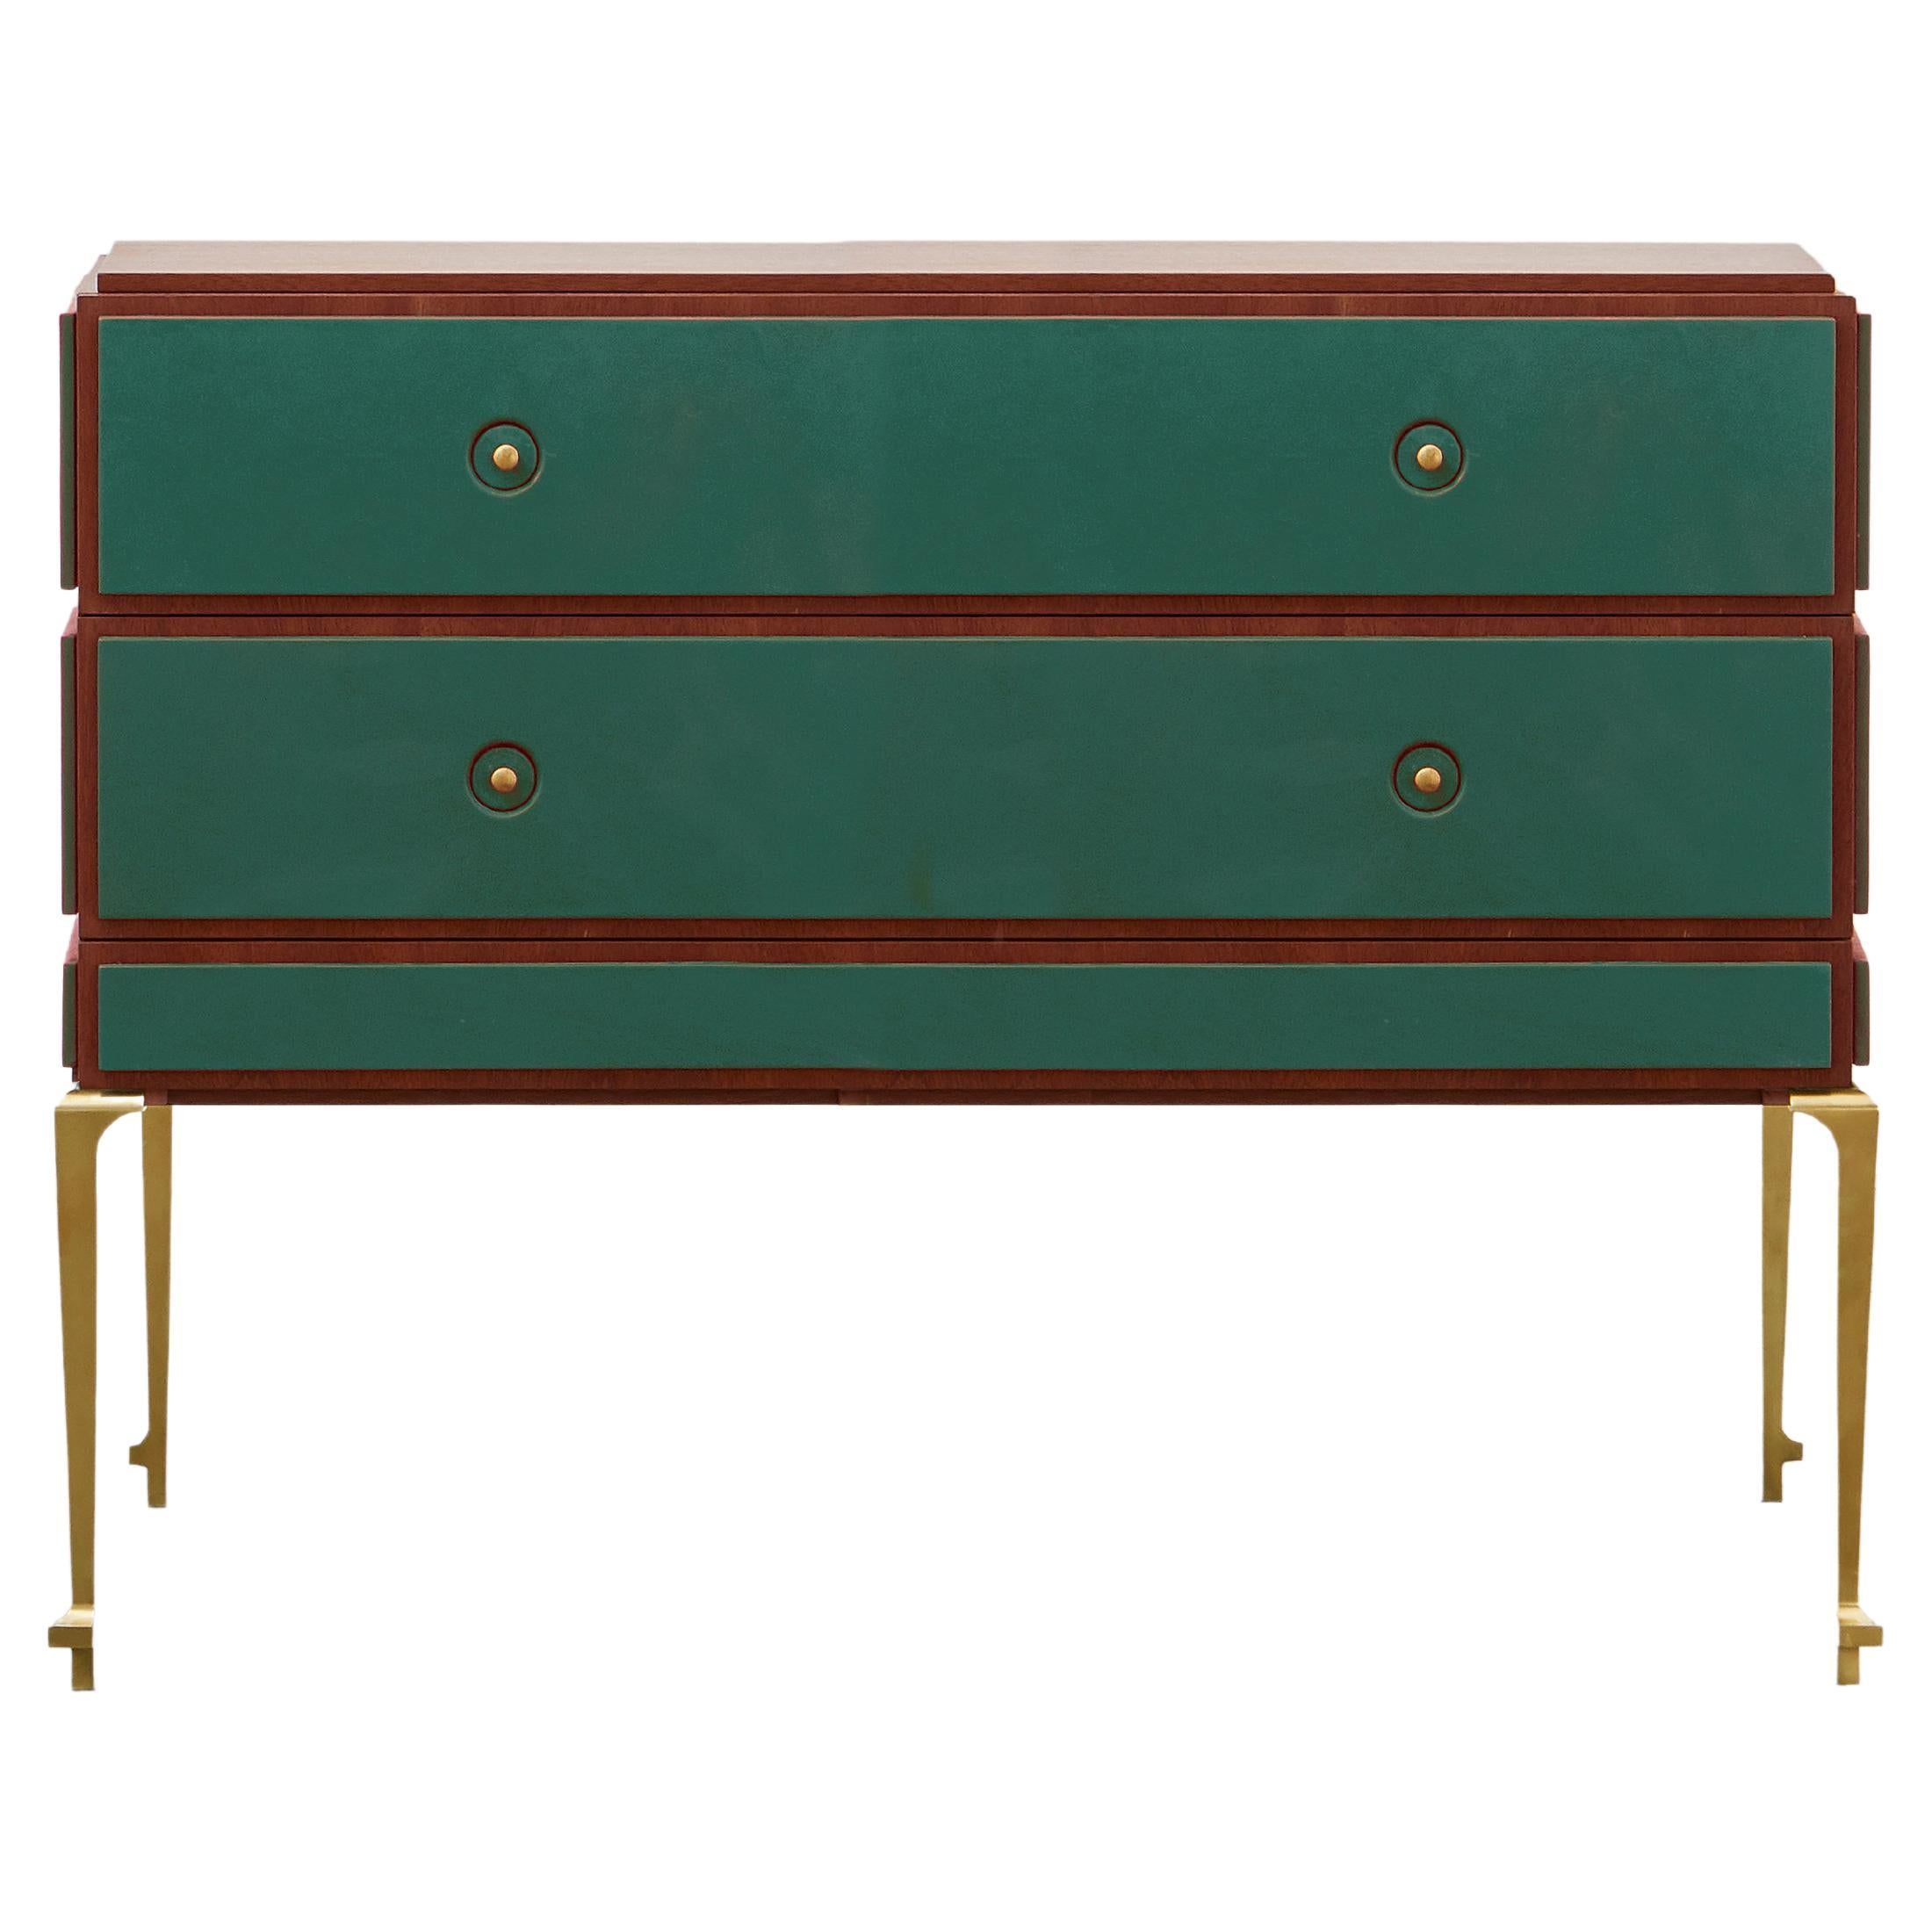 PH Grand Chest of Drawers, Mahogany, Emerald Green Leather Panels, Brass Legs